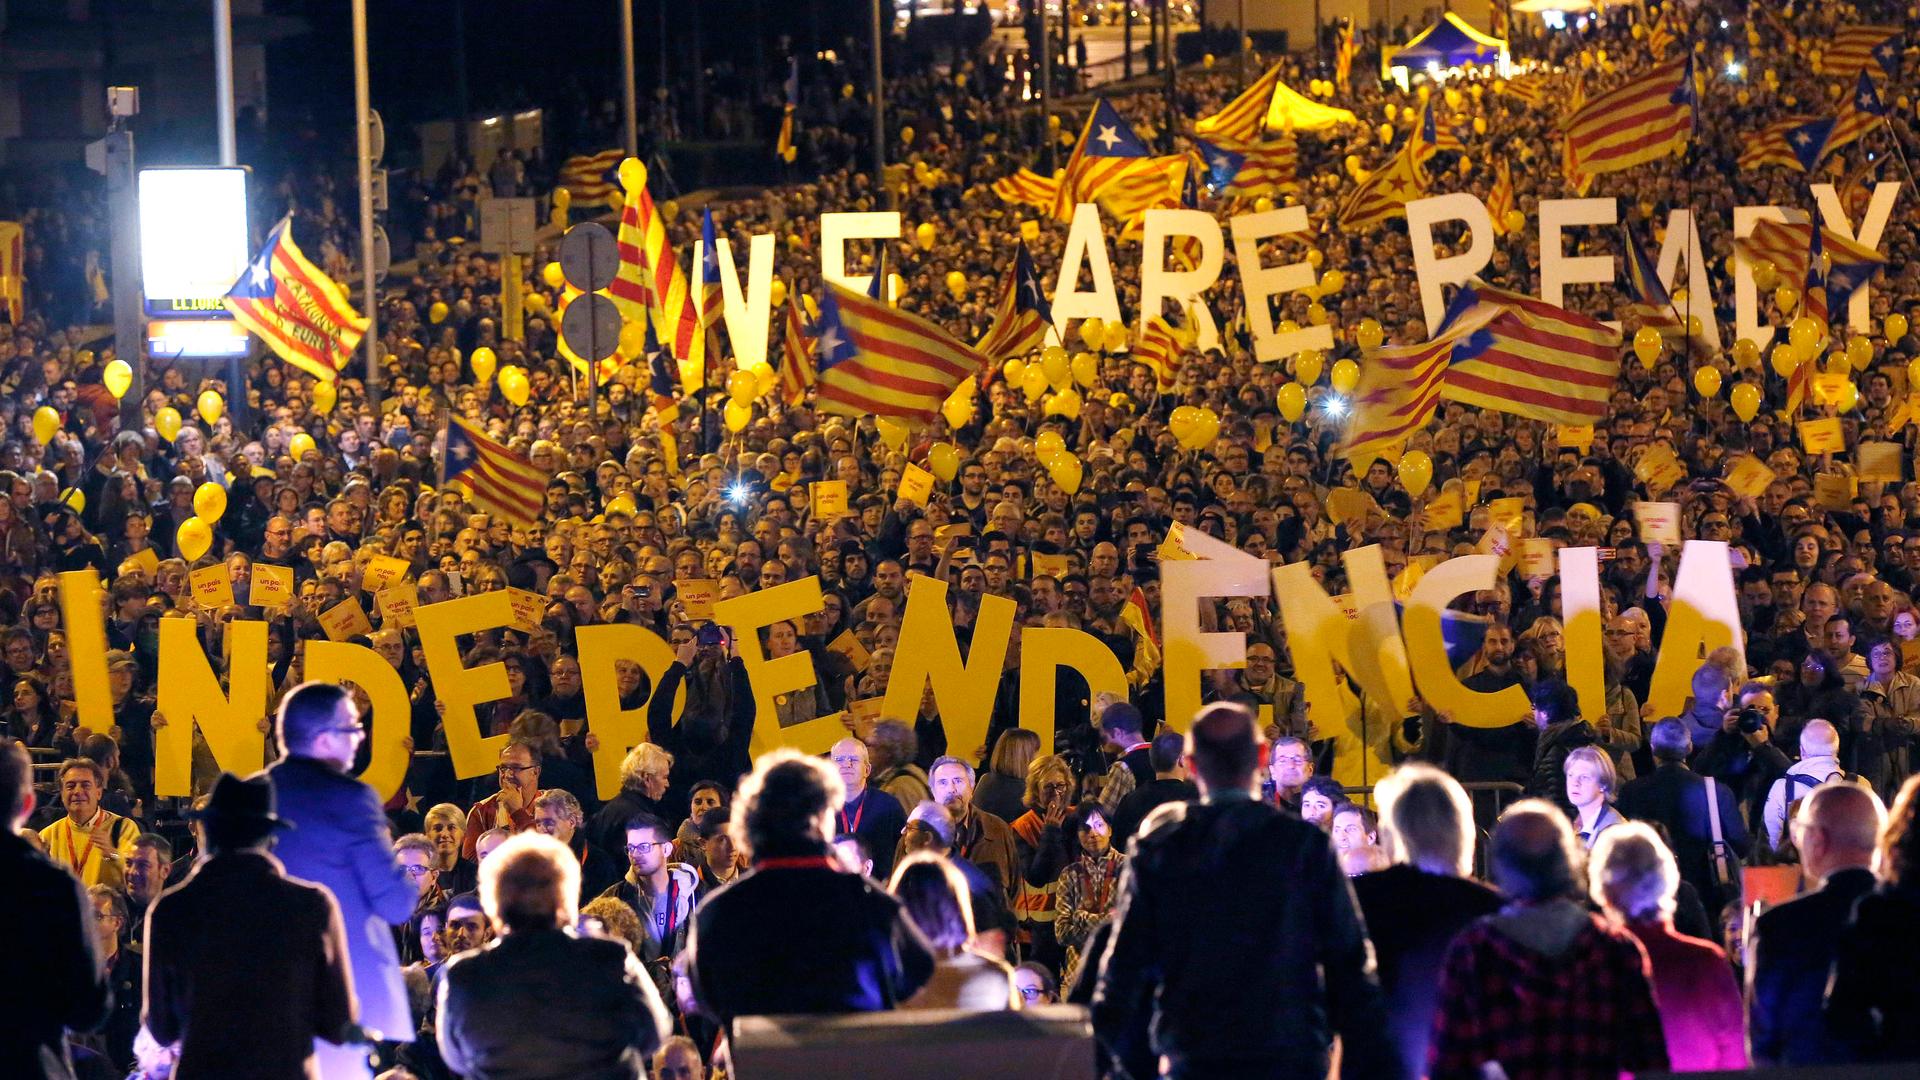 Pro-independence Catalonians hold up giant letters reading "We are ready, Independence" during the final meeting before a ceremonial referendum in Barcelona on November 7, 2014. 